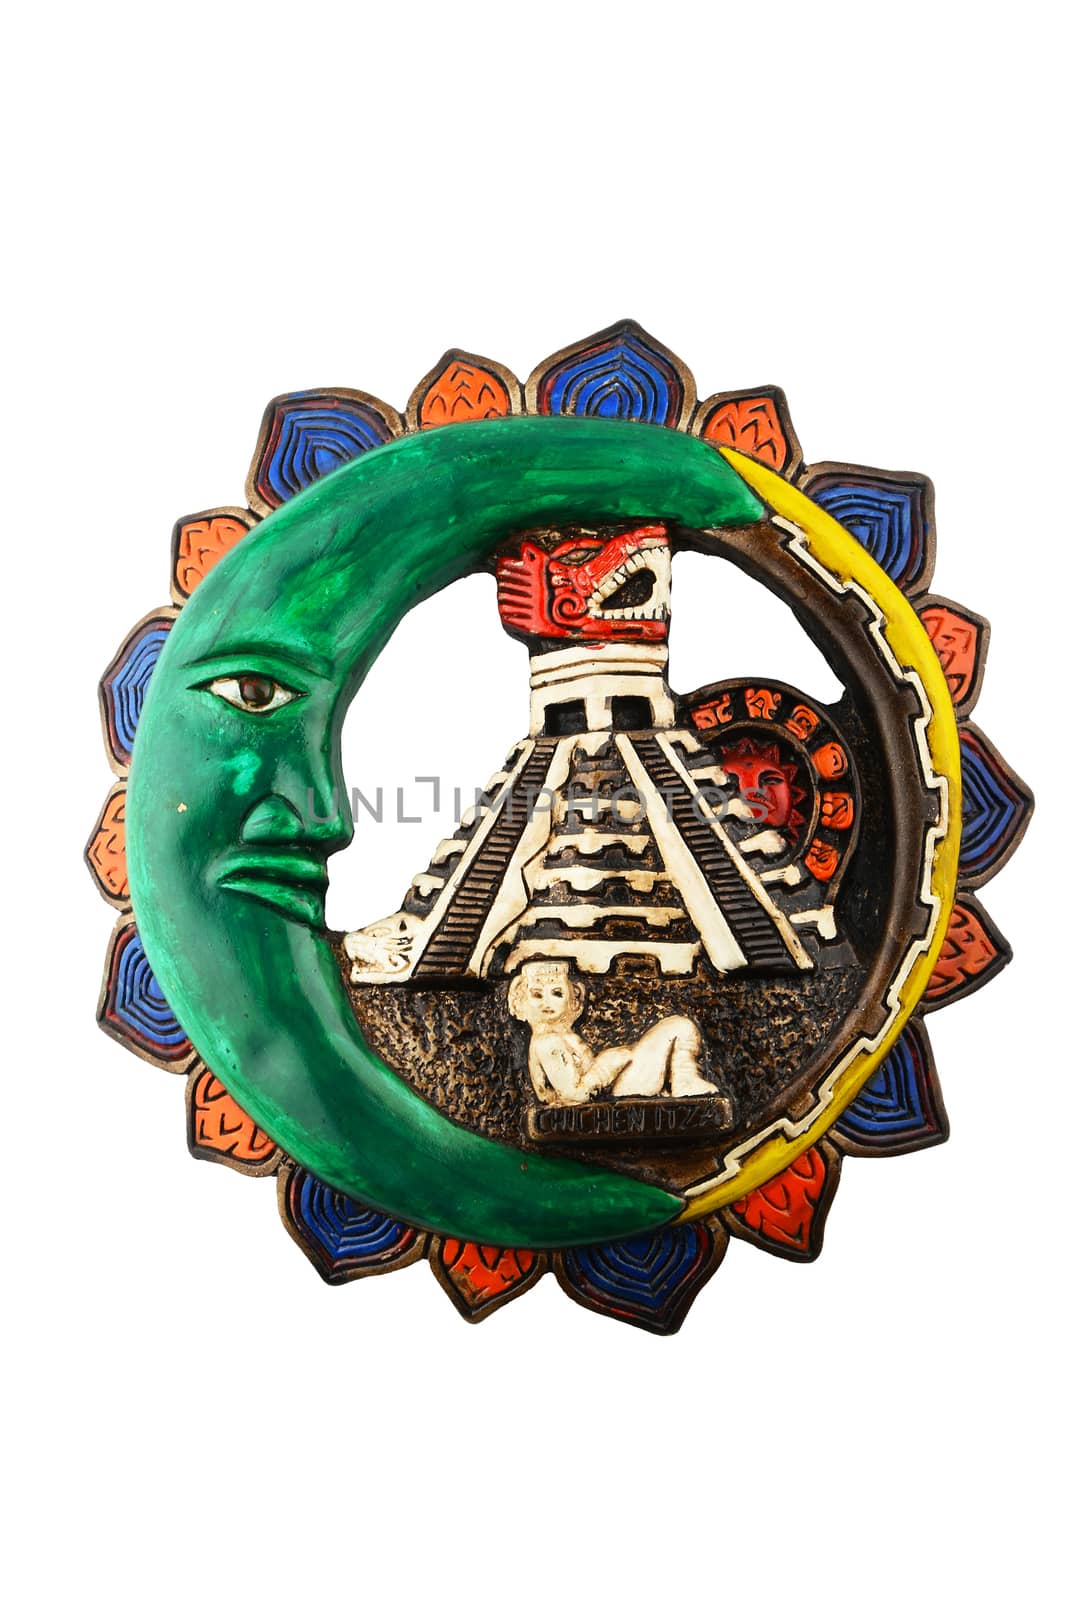 Mexican Mayan Chichen Itza souvenir ceramic painted plate with Moon, pyramid and girl isolated on white